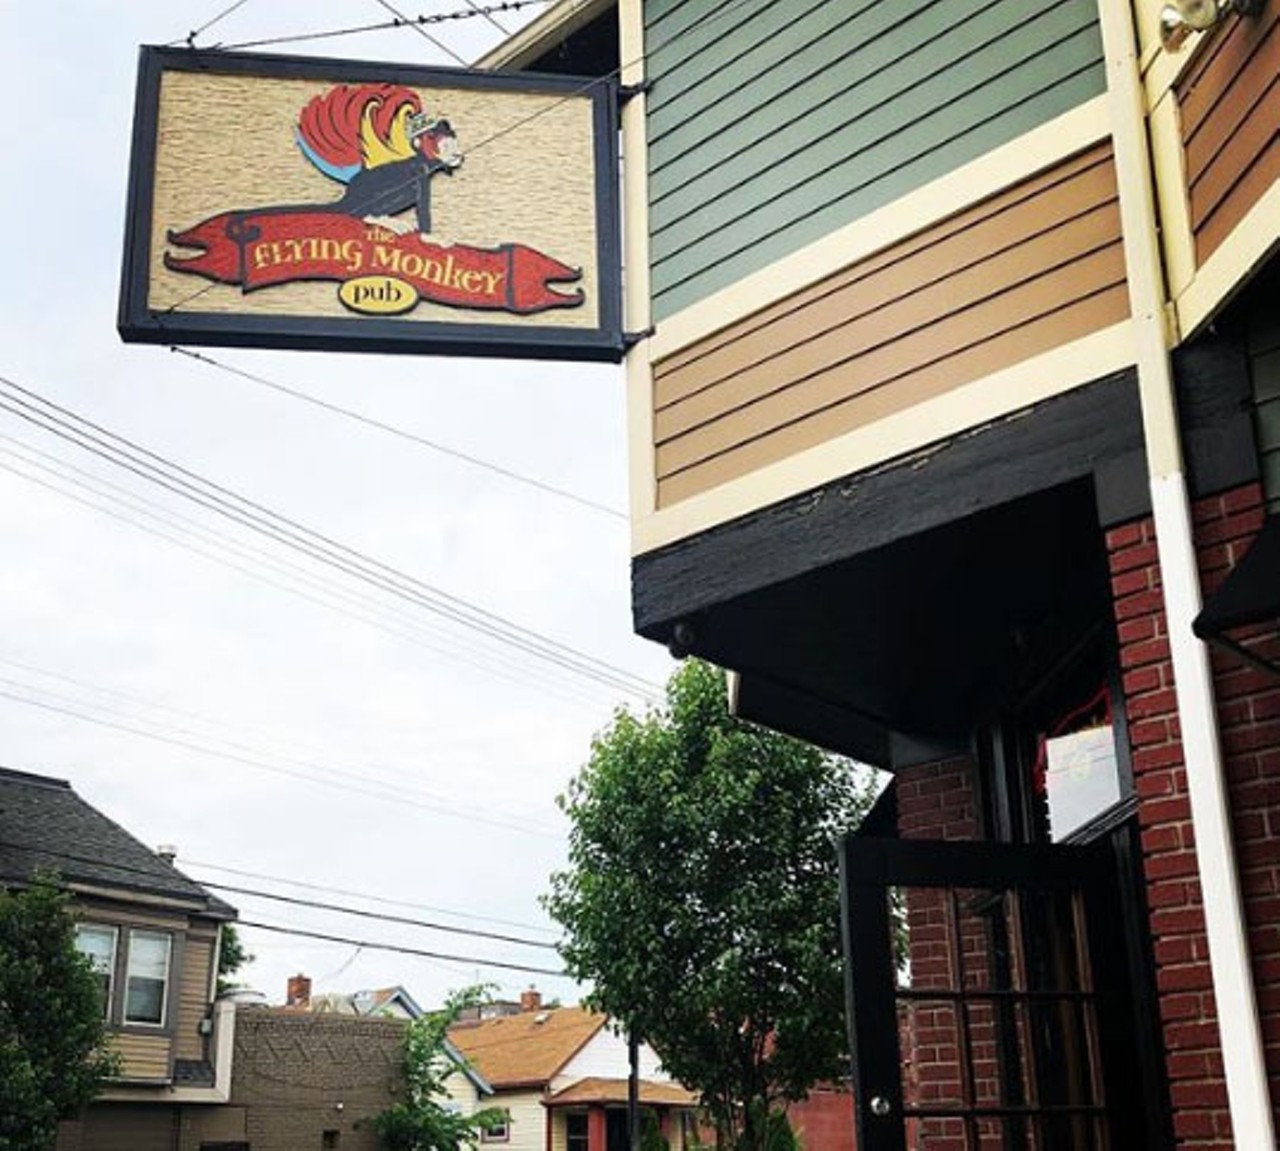 Flying Monkey Pub
819 Jefferson Ave., 216-861-6659
Beginning at 8:30 p.m. every Sunday night, pub goers come to belt it out at this popular Tremont spot. 
Photo via brewreviewcle/Instagram